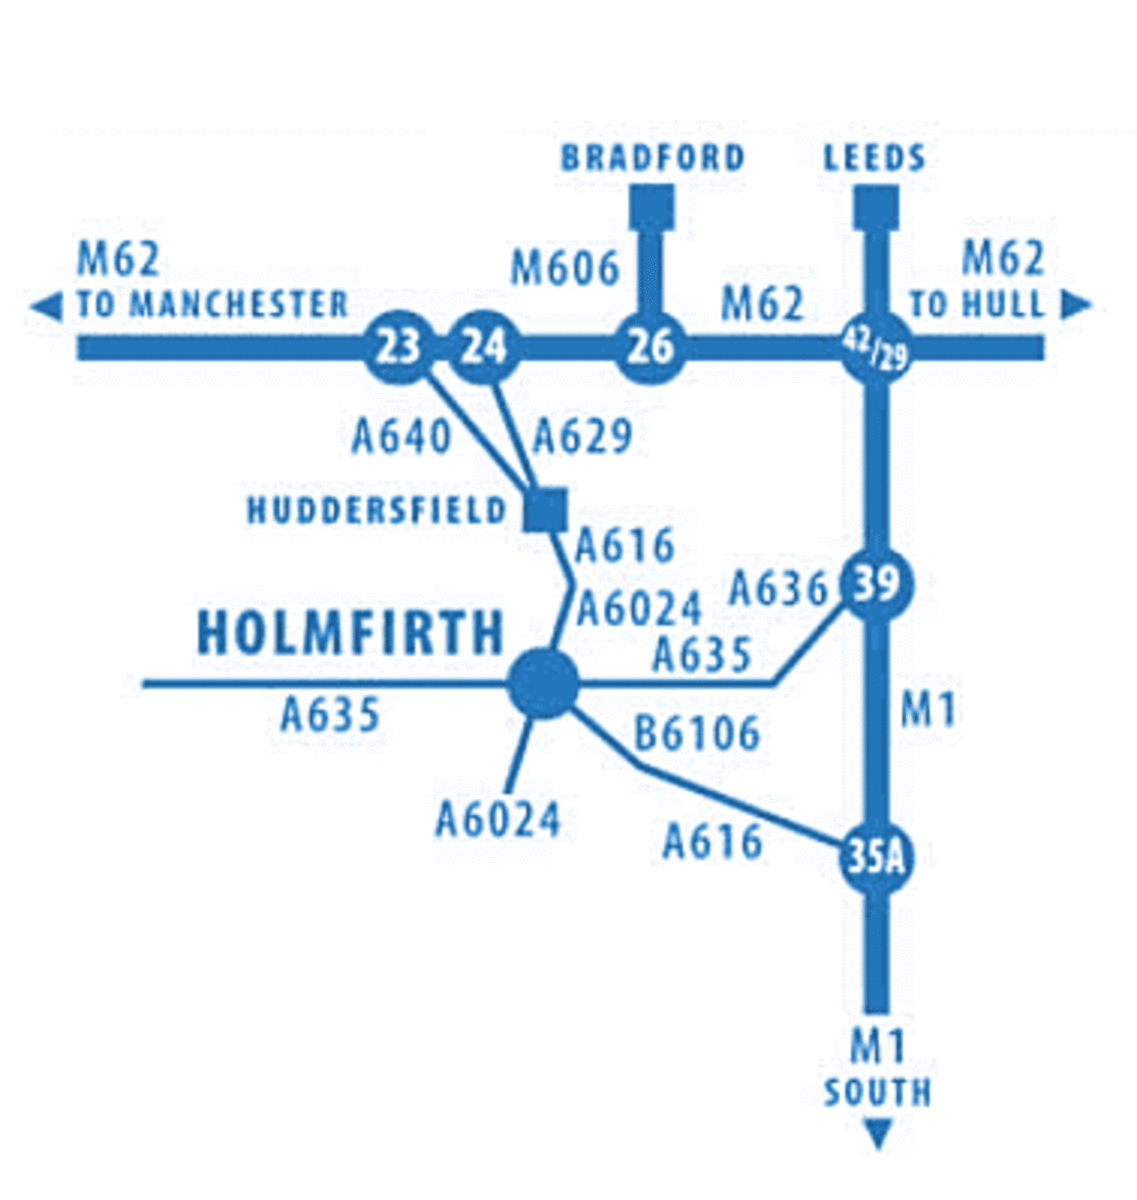 Road routes from the M1 Motorway to Holmfirth and the West Riding